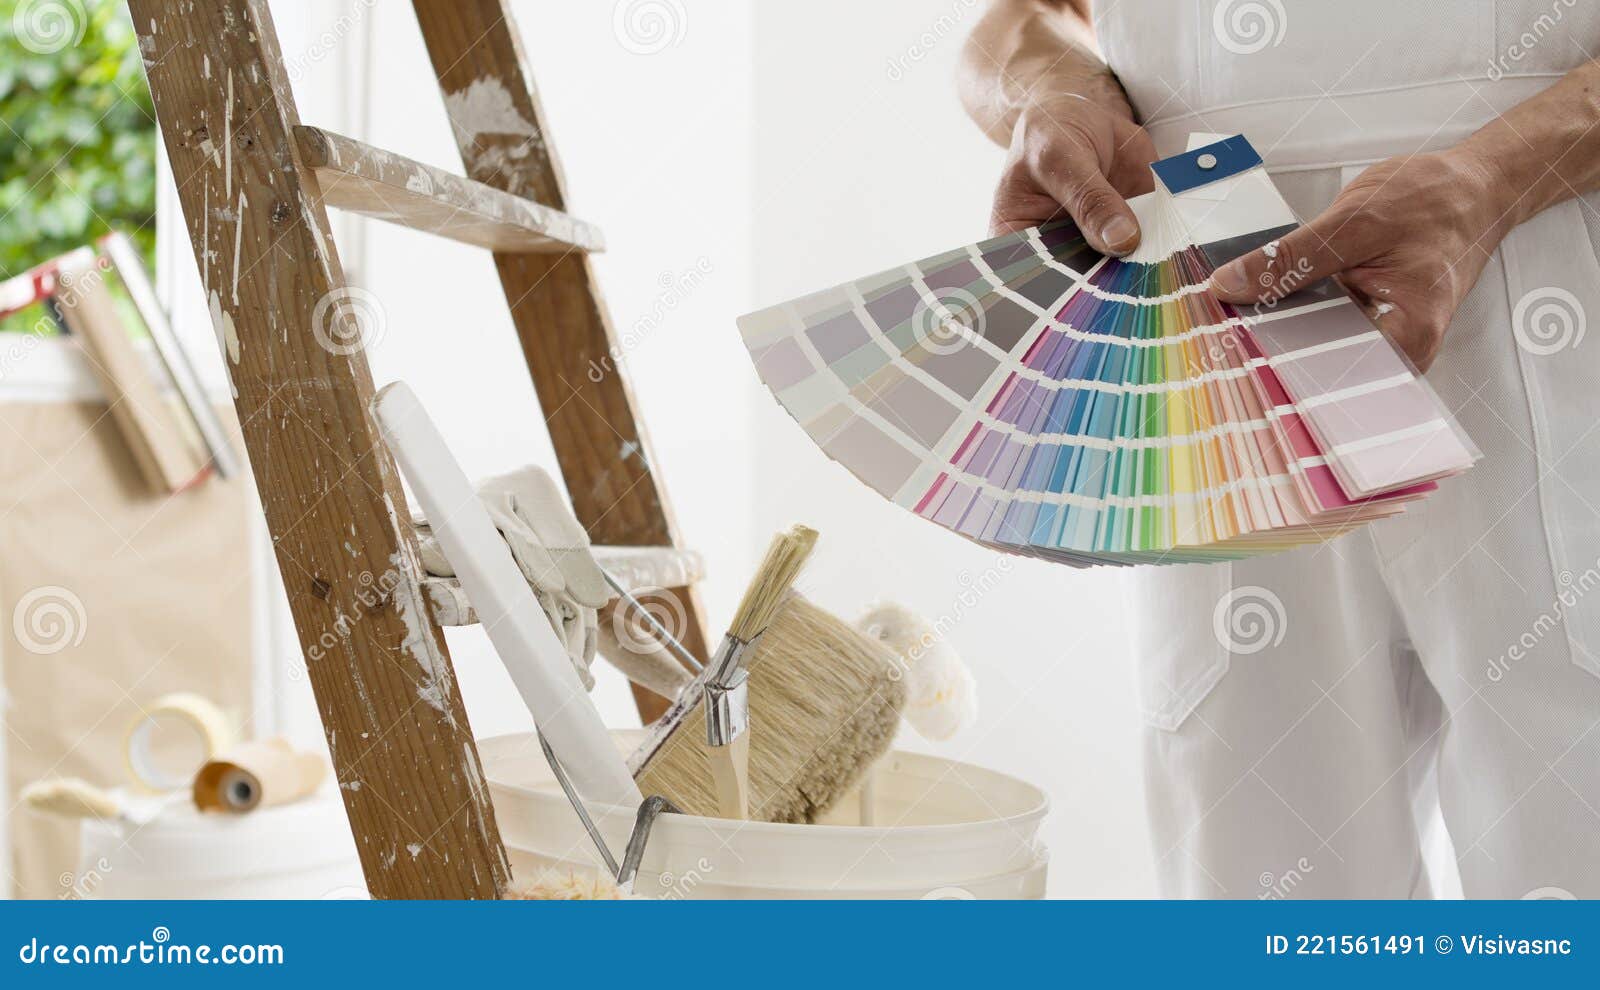 hands of house painter man decorator choose the color using the sample swatch, work of the house to renovate, a wooden ladder with